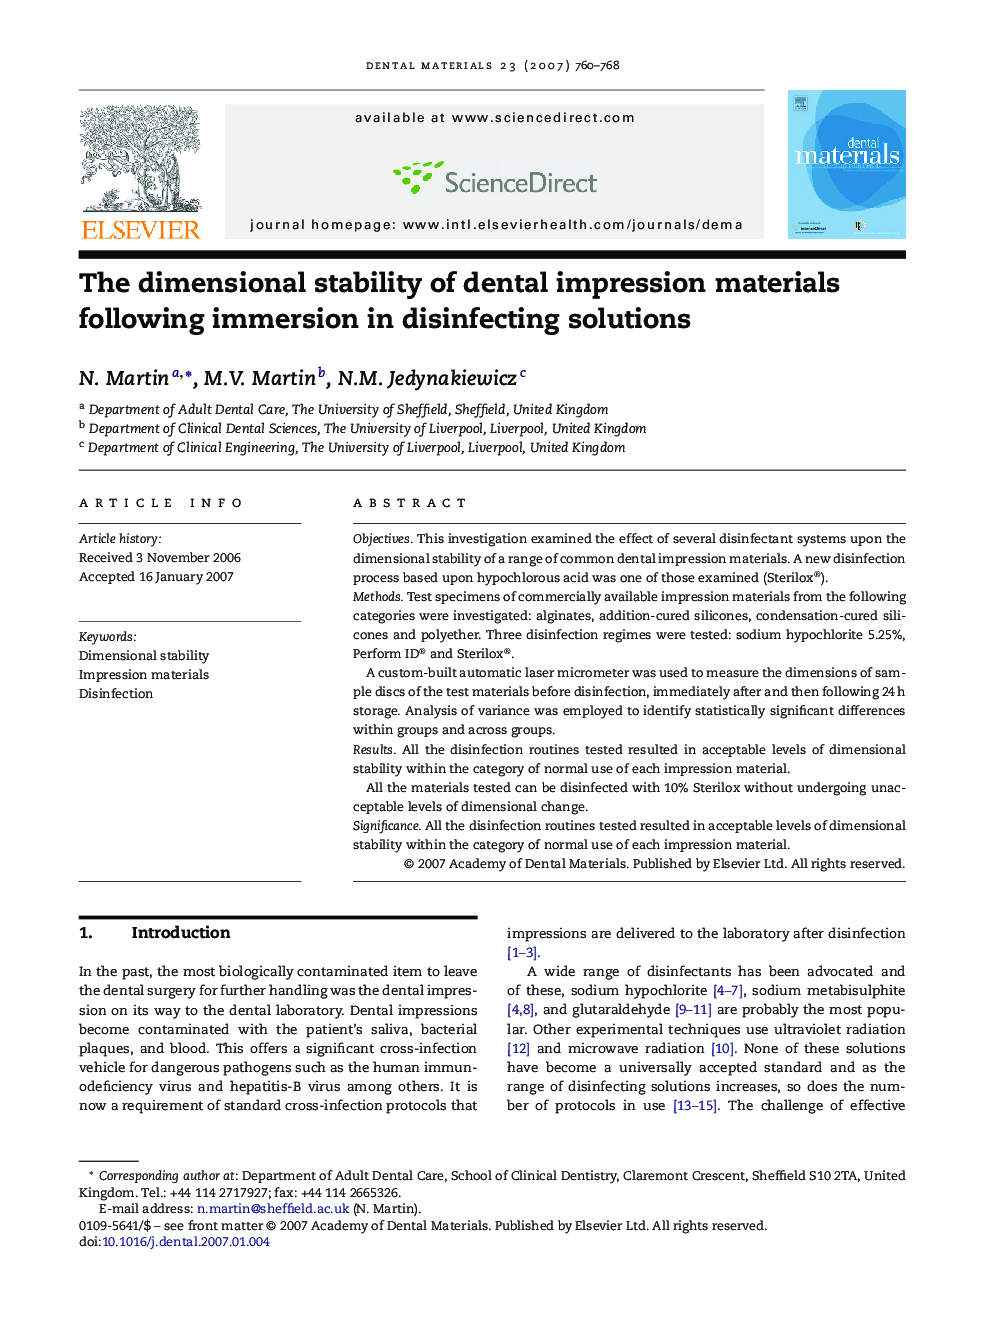 The dimensional stability of dental impression materials following immersion in disinfecting solutions